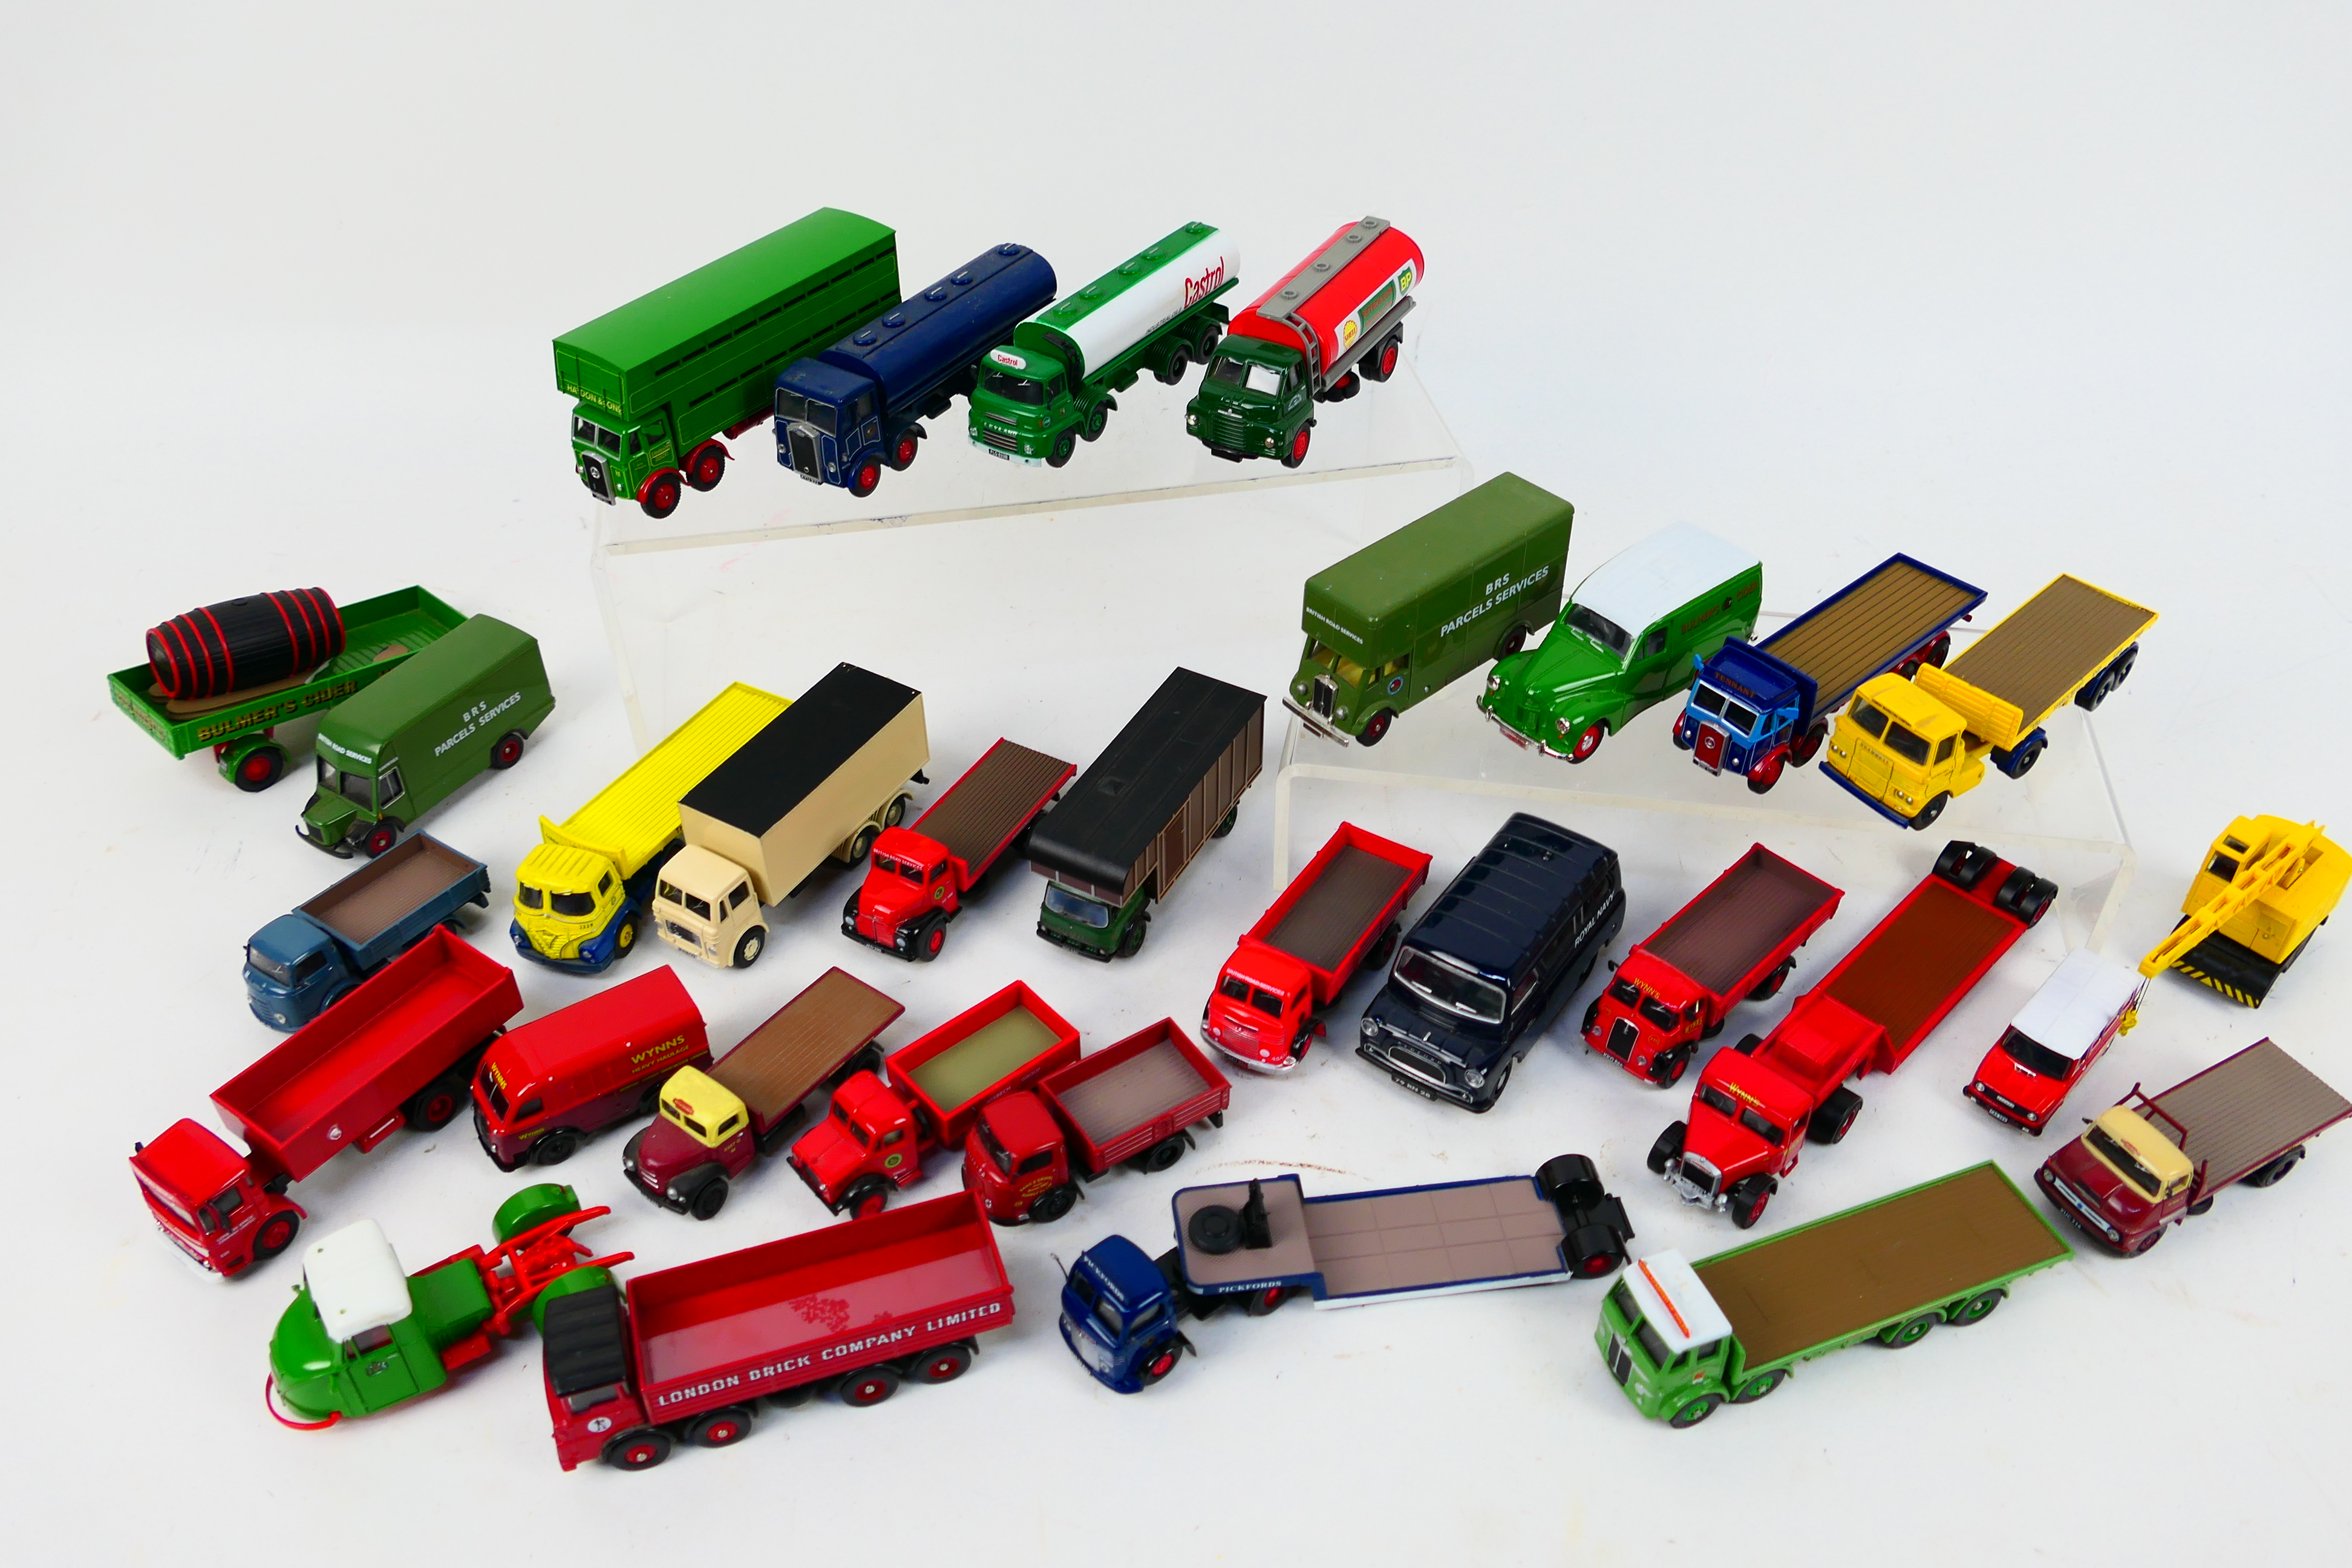 Oxford Diecast - Vanguards - Corgi - Lledo - Other - Approximately 30 unboxed diecast model